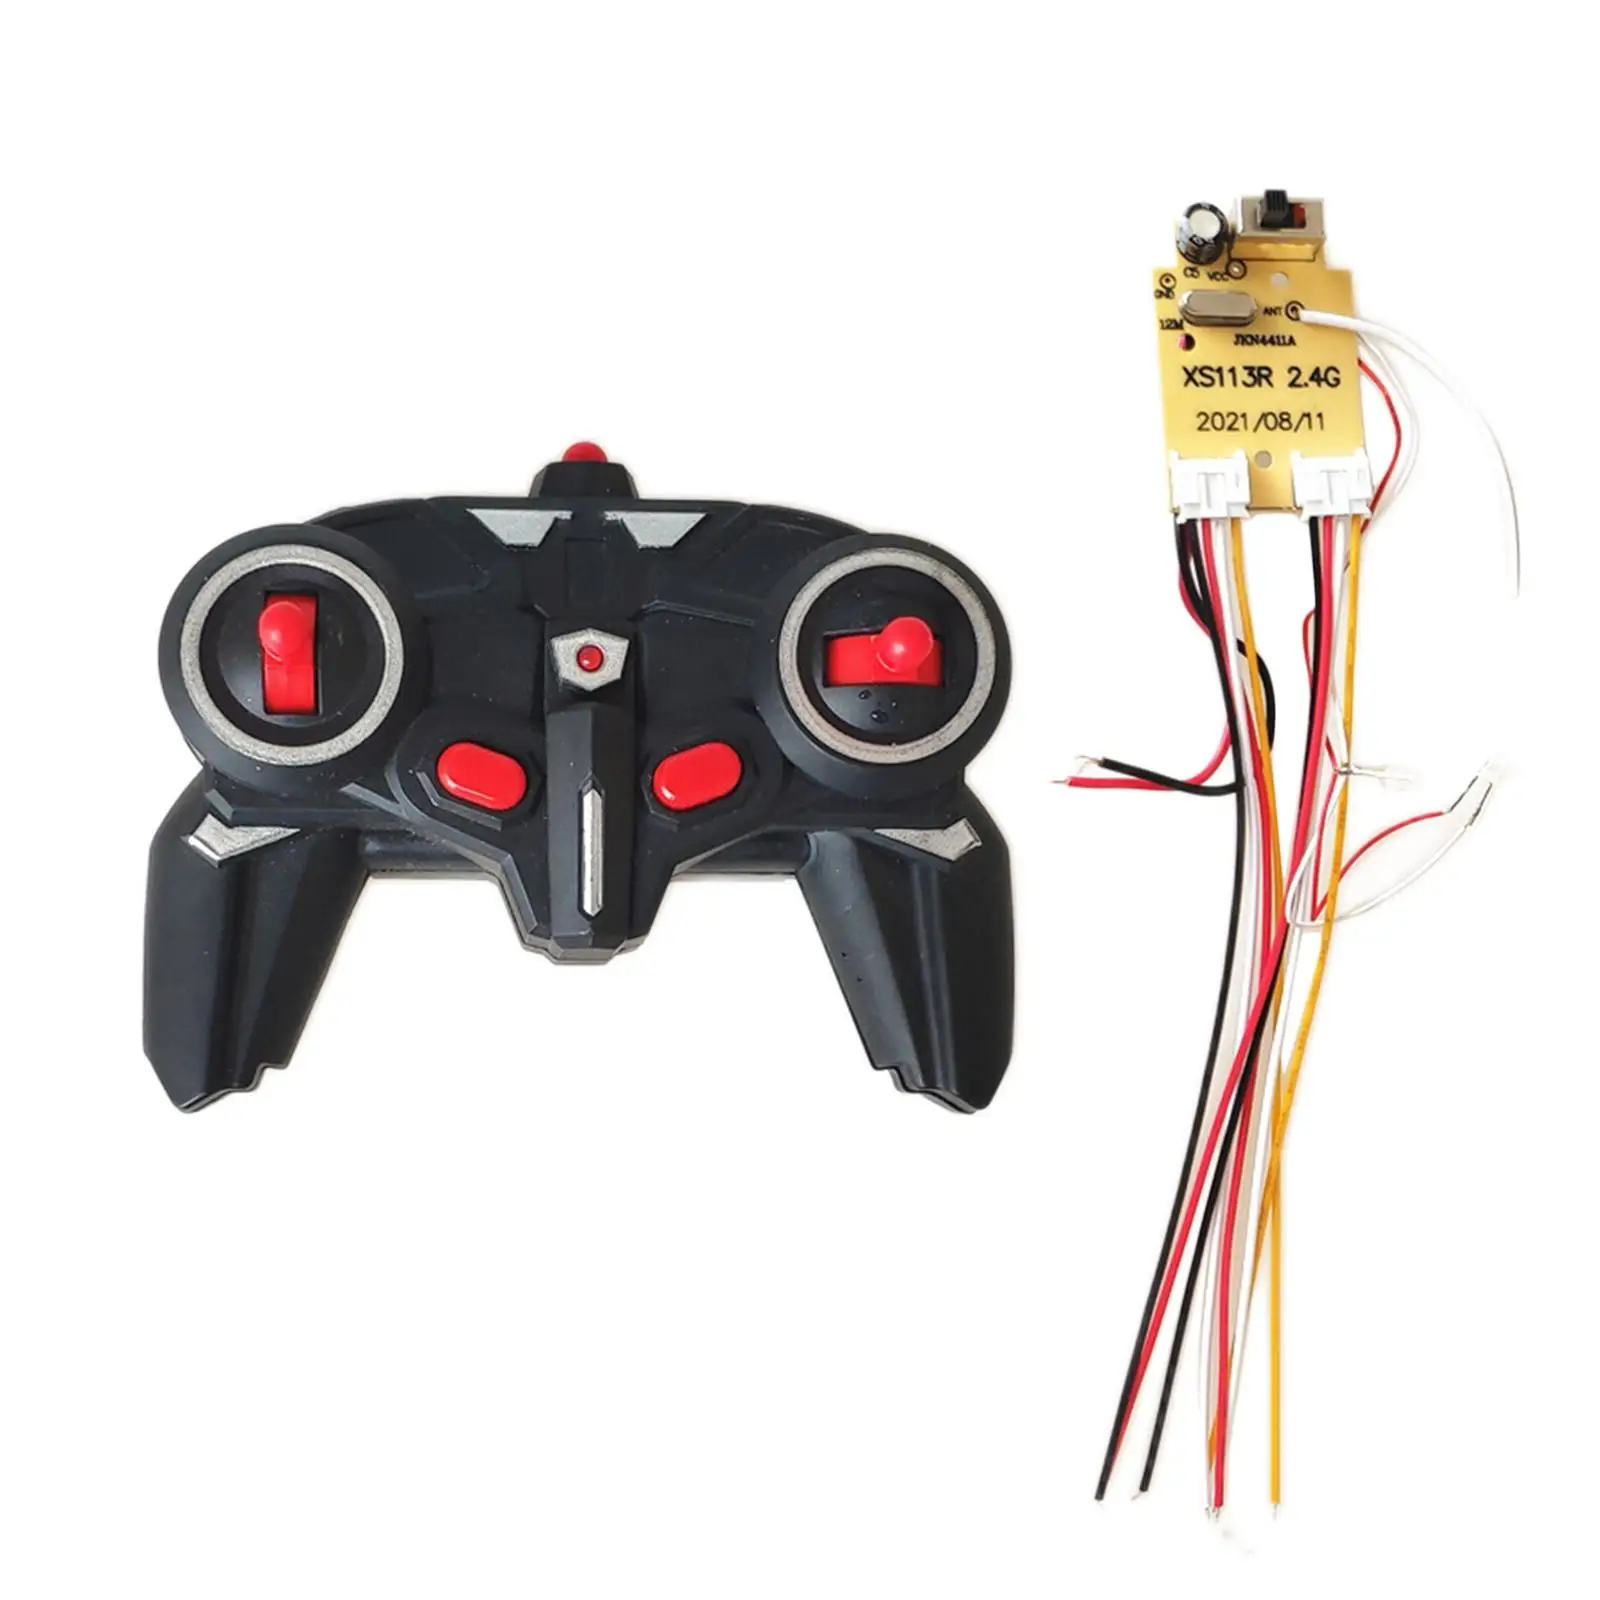 2.4GHz RC Controller Transmitter & Receiver for Omnidirectional Wheel